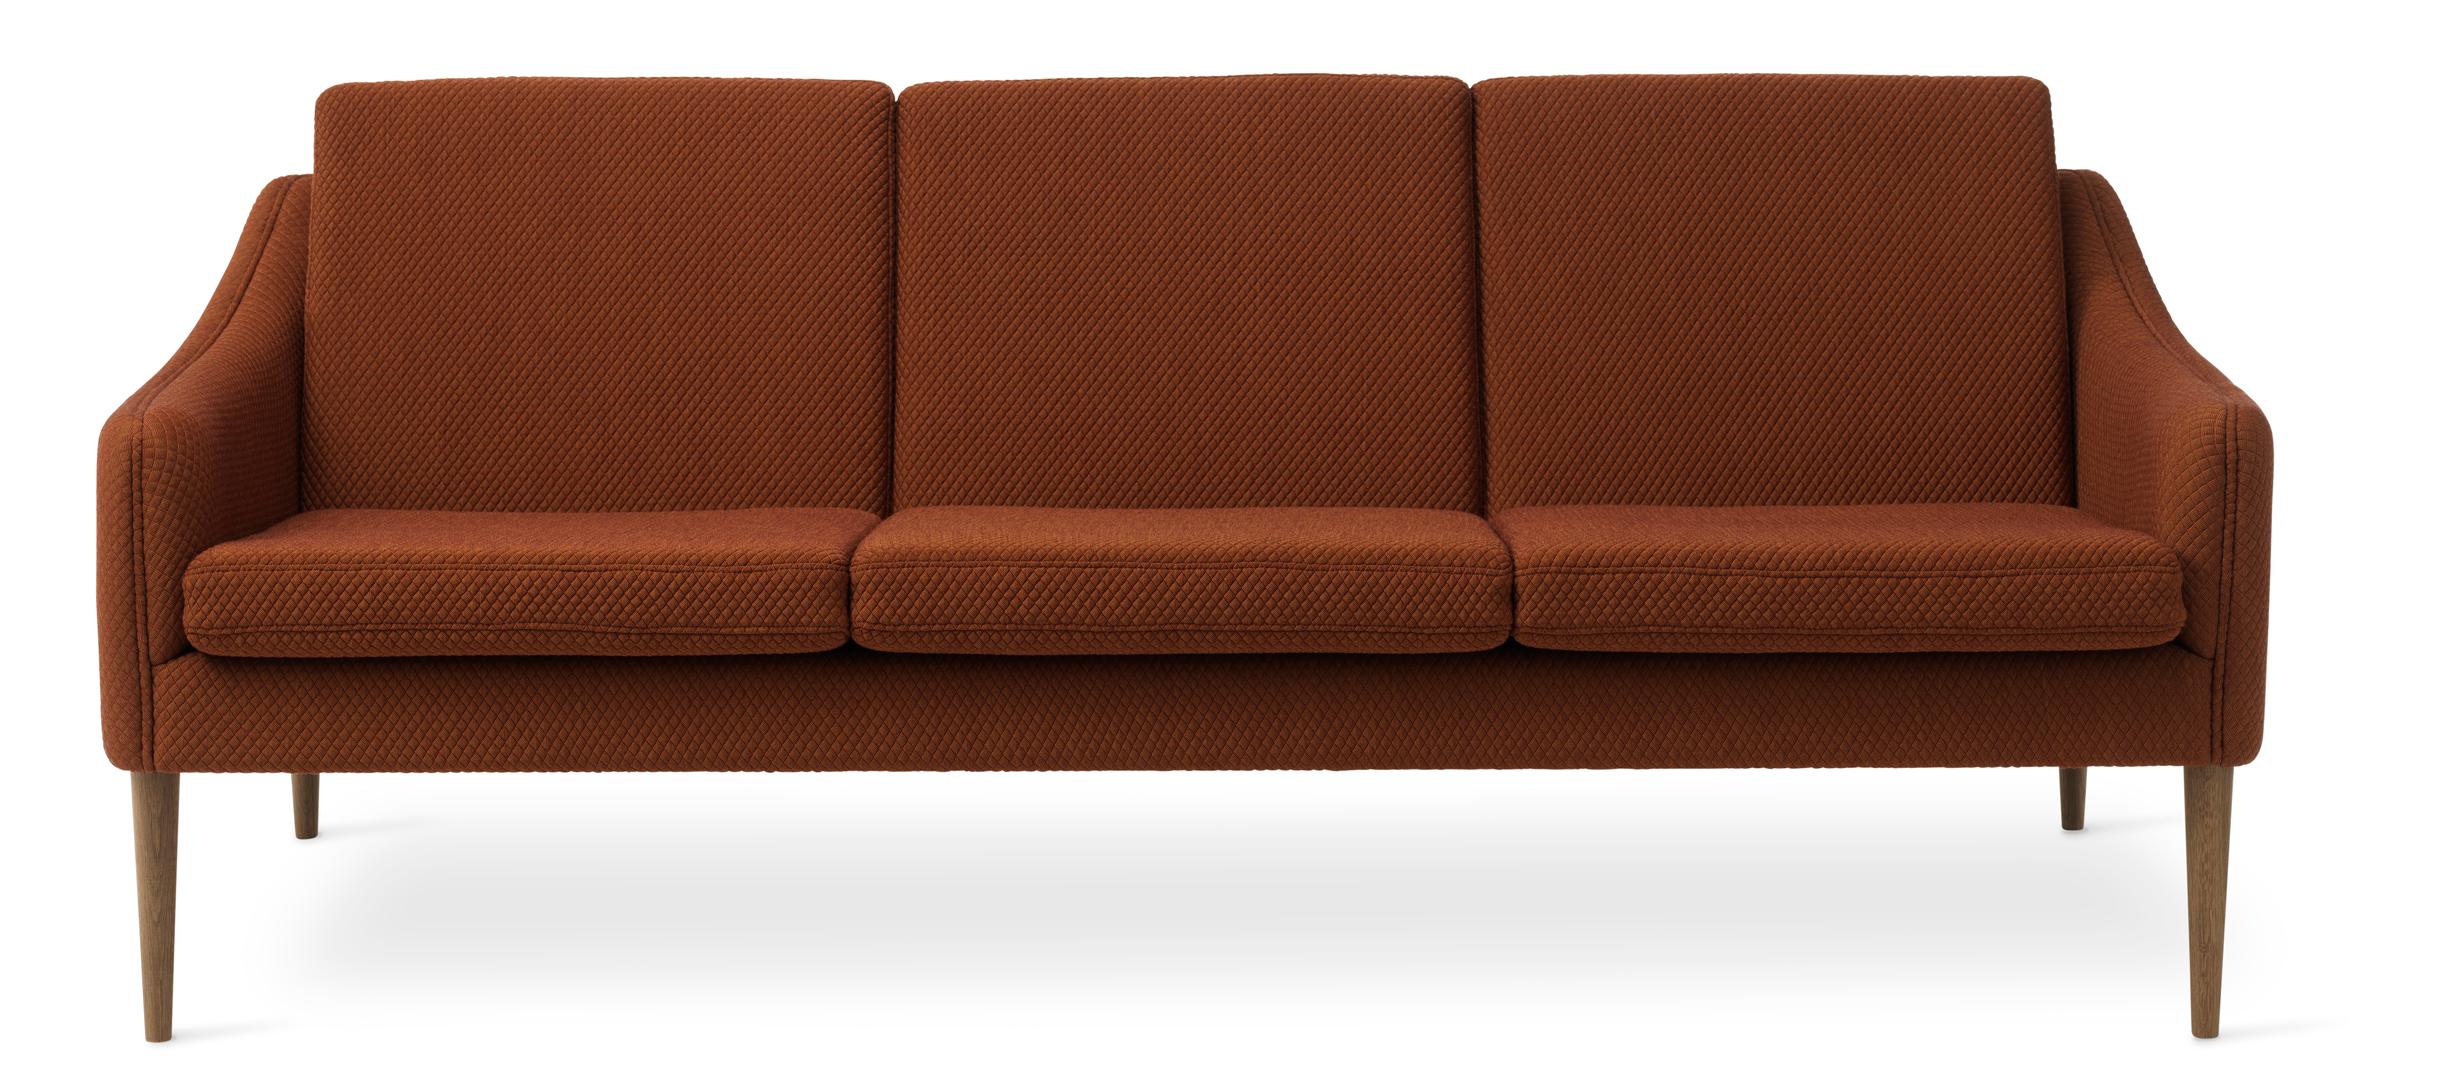 For Sale: Brown (Mosaic 472) Mr. Olsen 3-Seat Sofa with Smoked Oak Legs, by Hans Olsen from Warm Nordic